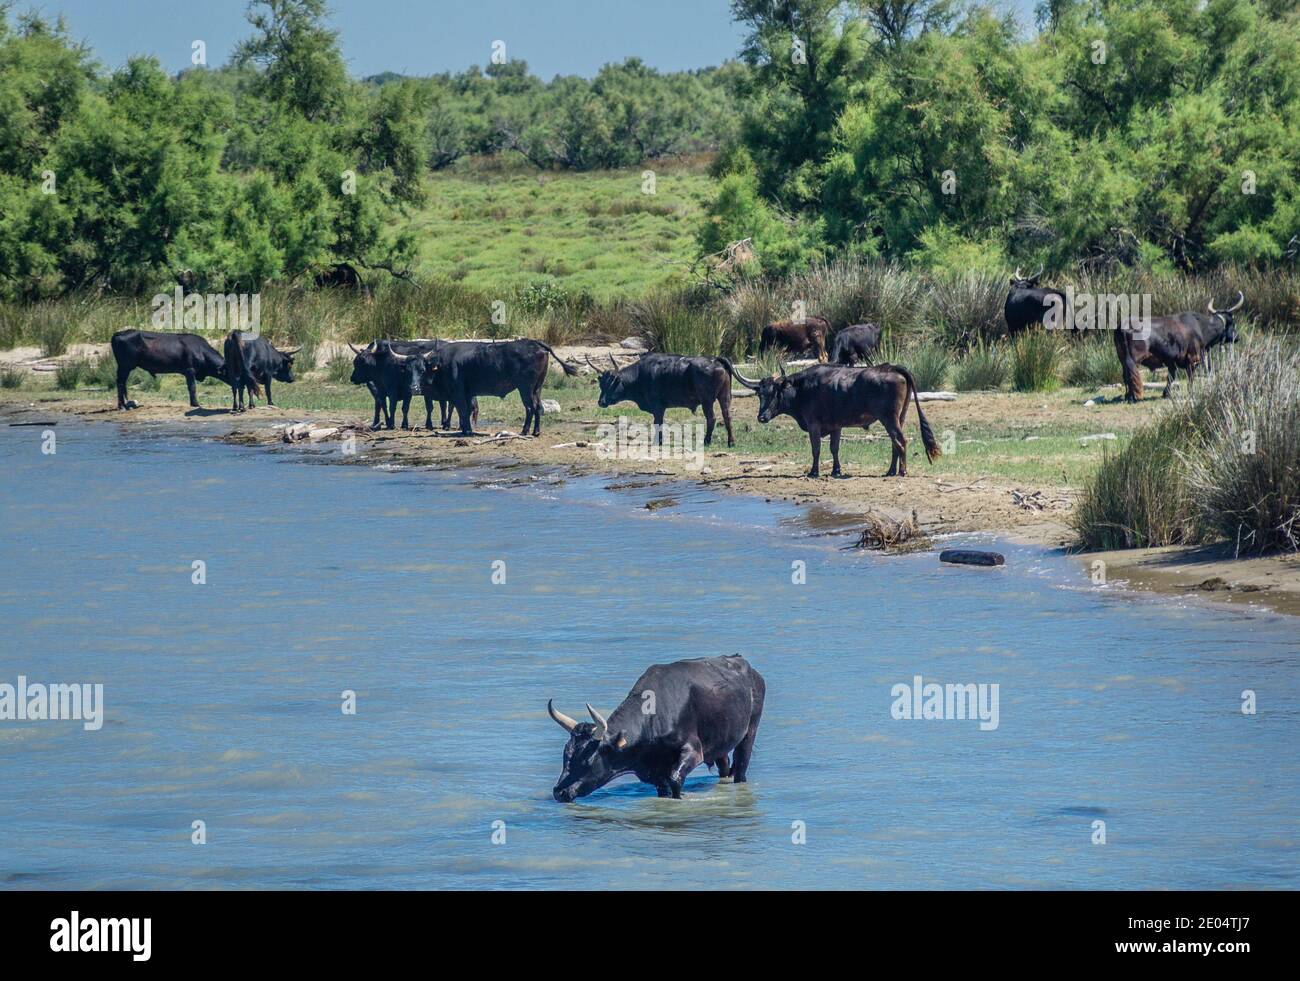 cattle on the banks of the Petit Rhône distributary in the Camargue near Saintes-Maries-de-la-Mer,some of the bulls are used for bull-fighting and for Stock Photo